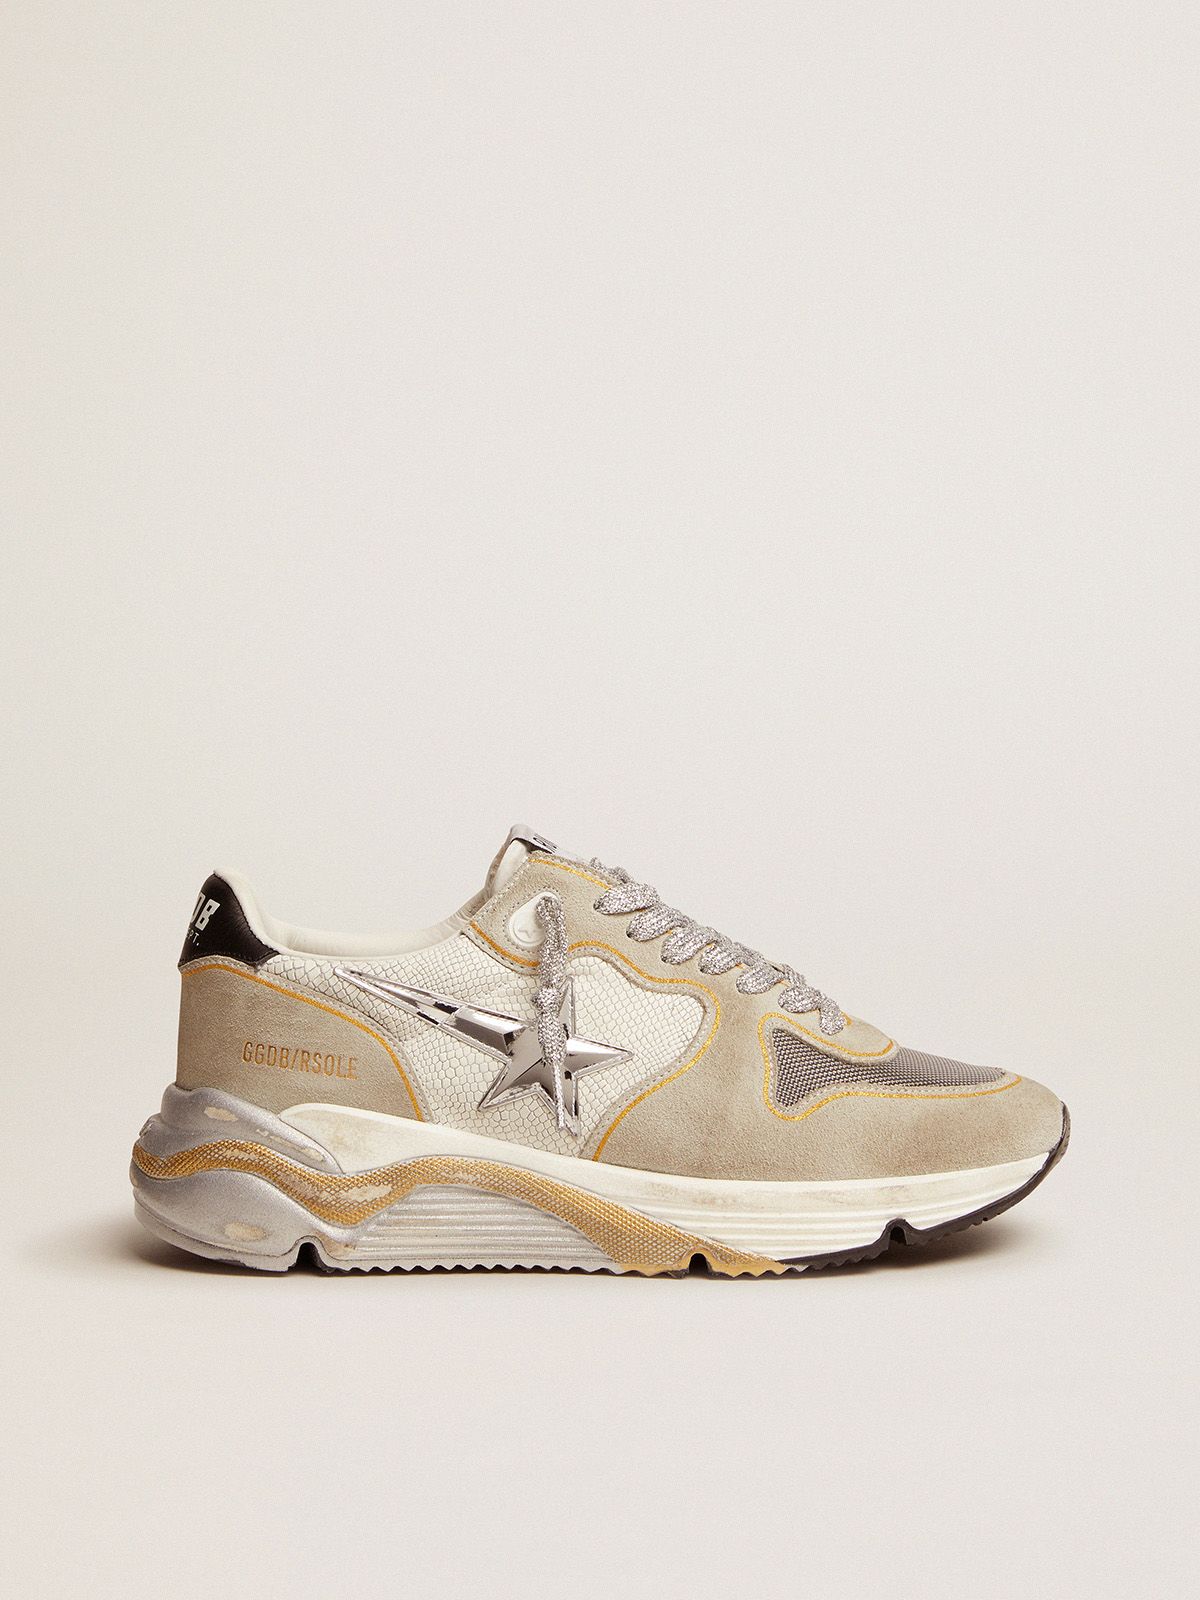 golden goose mesh LTD snake-print insert sneakers in with leather Sole Running and white suede